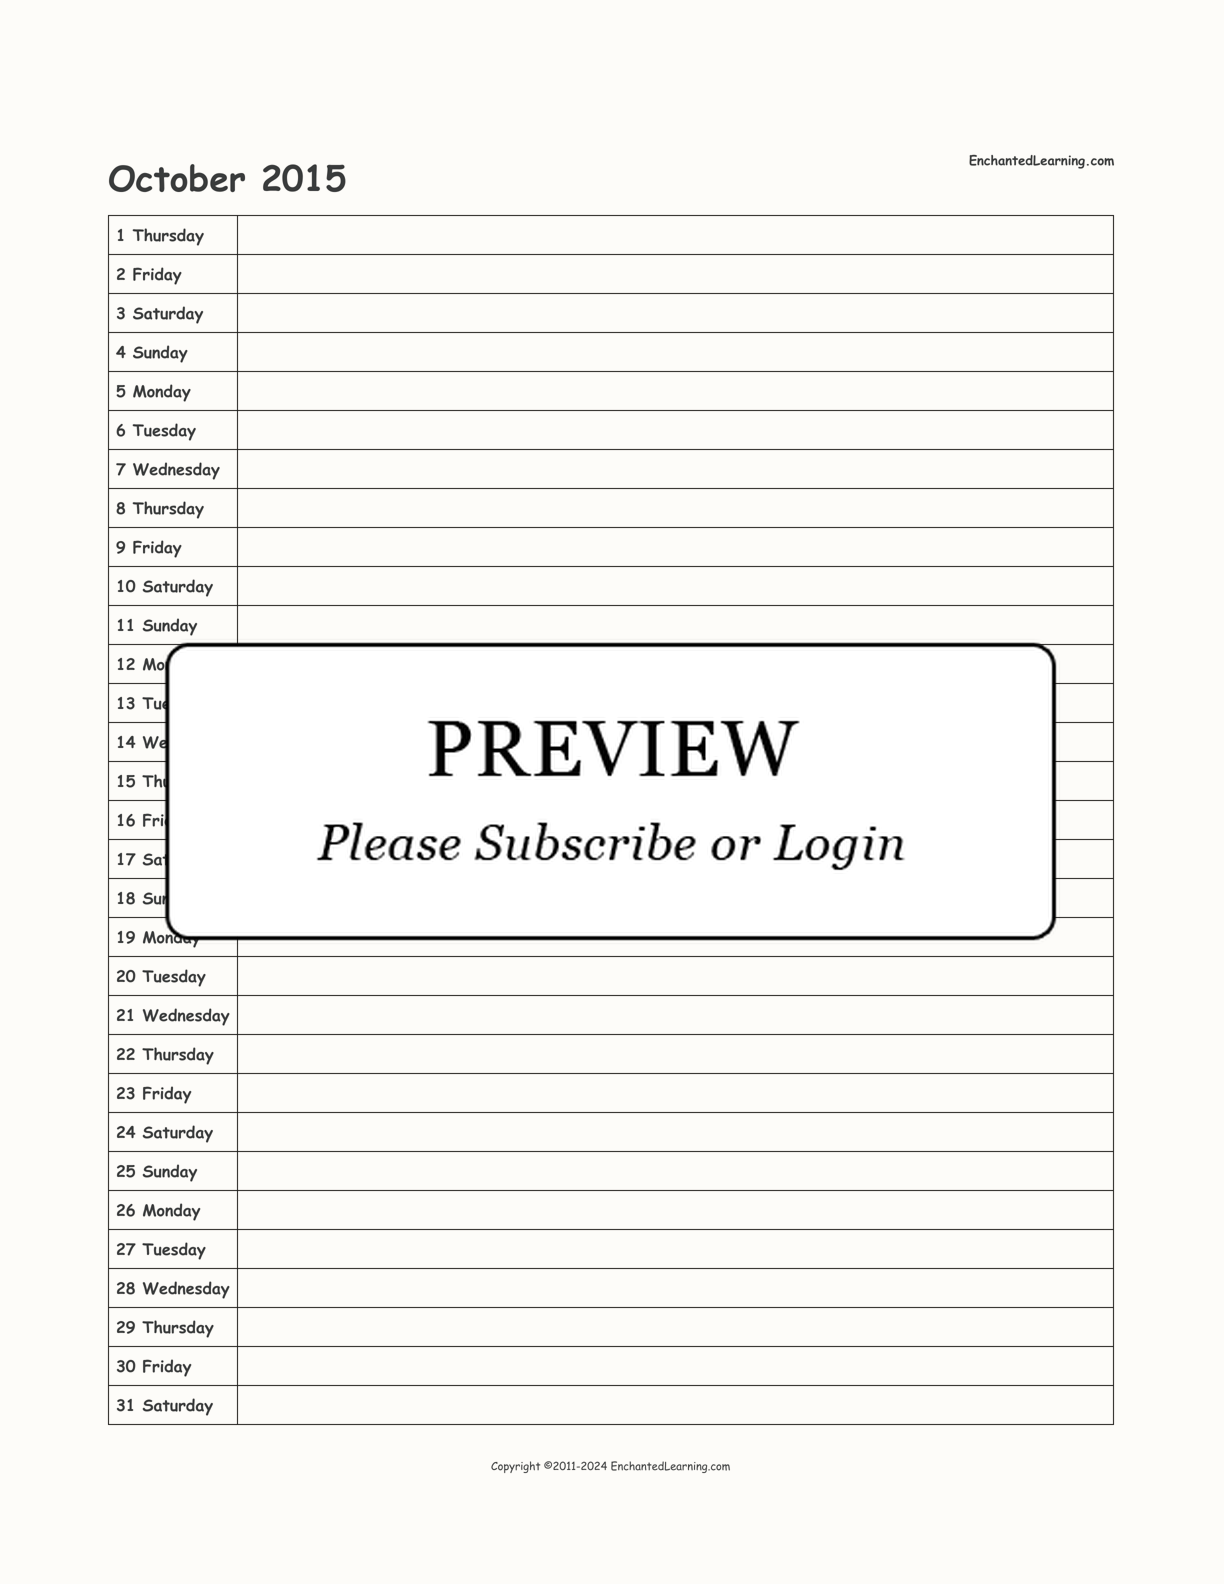 2015 Scheduling Calendar interactive printout page 10